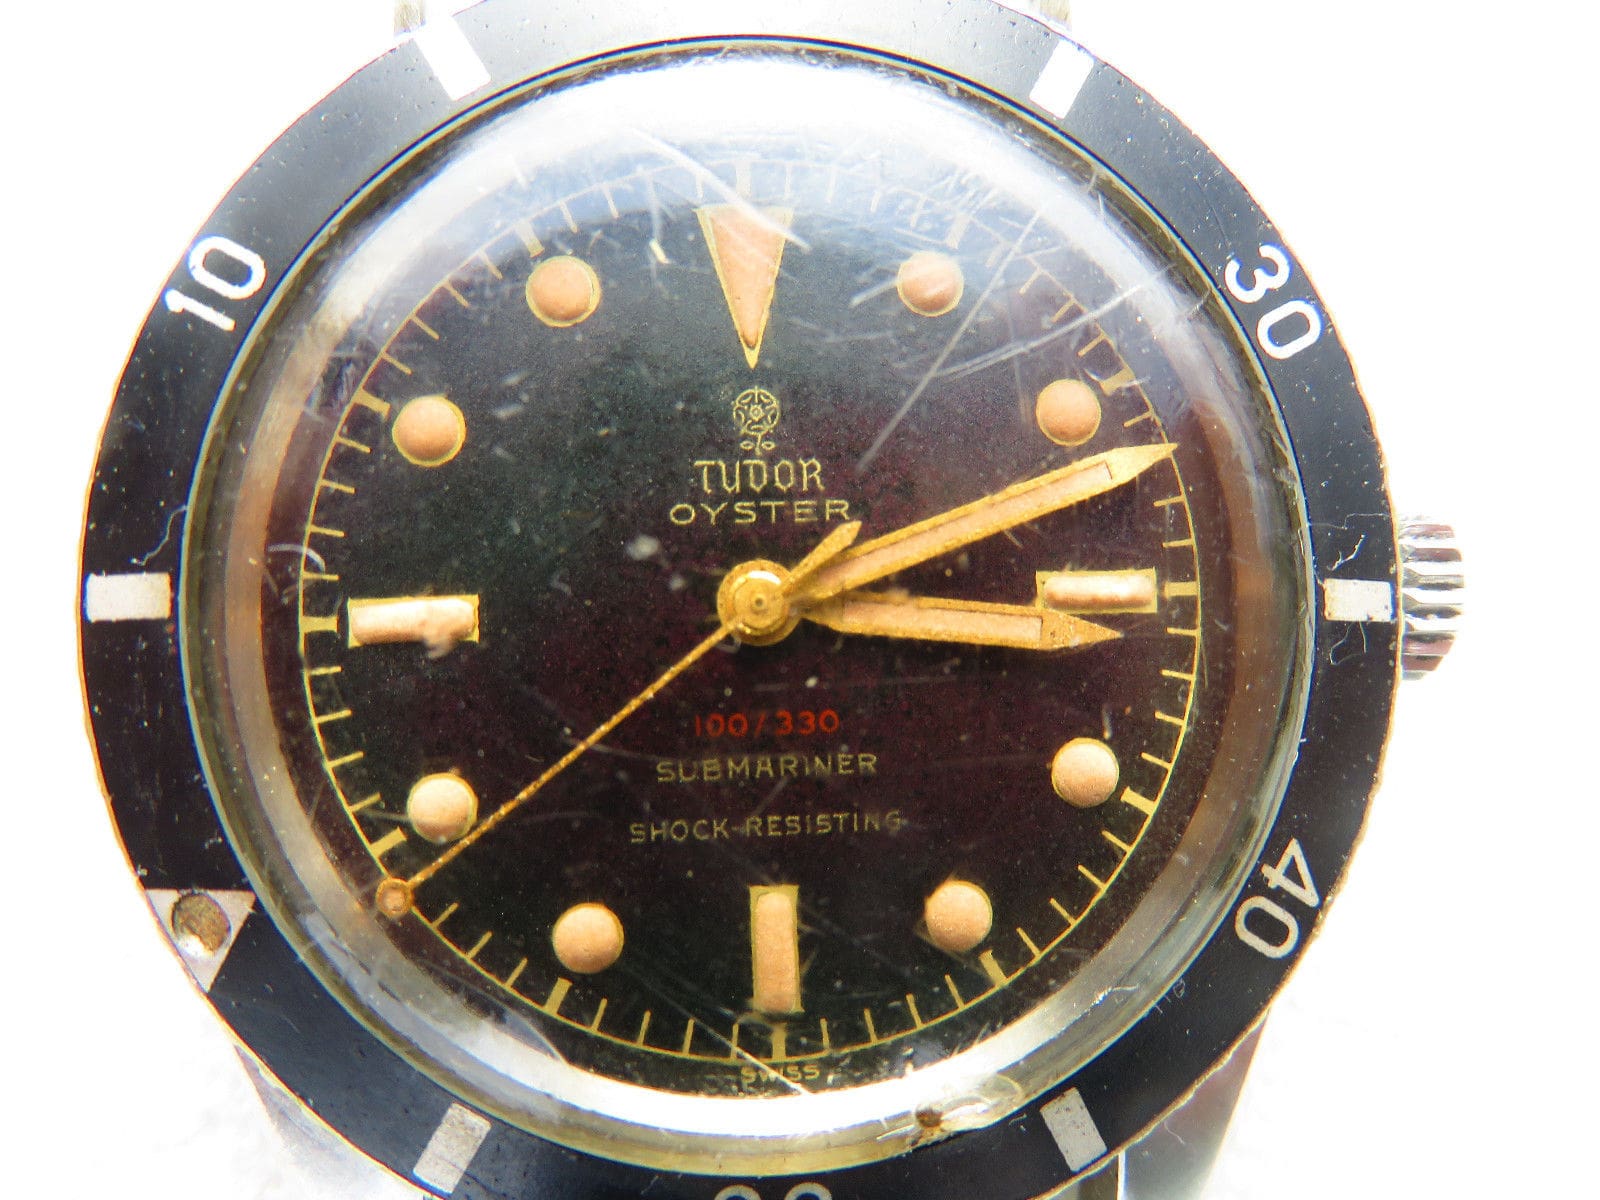 NEWS: This beaten-up Tudor Oyster Submariner 7923 is about to sell for more than $100,000 on eBay